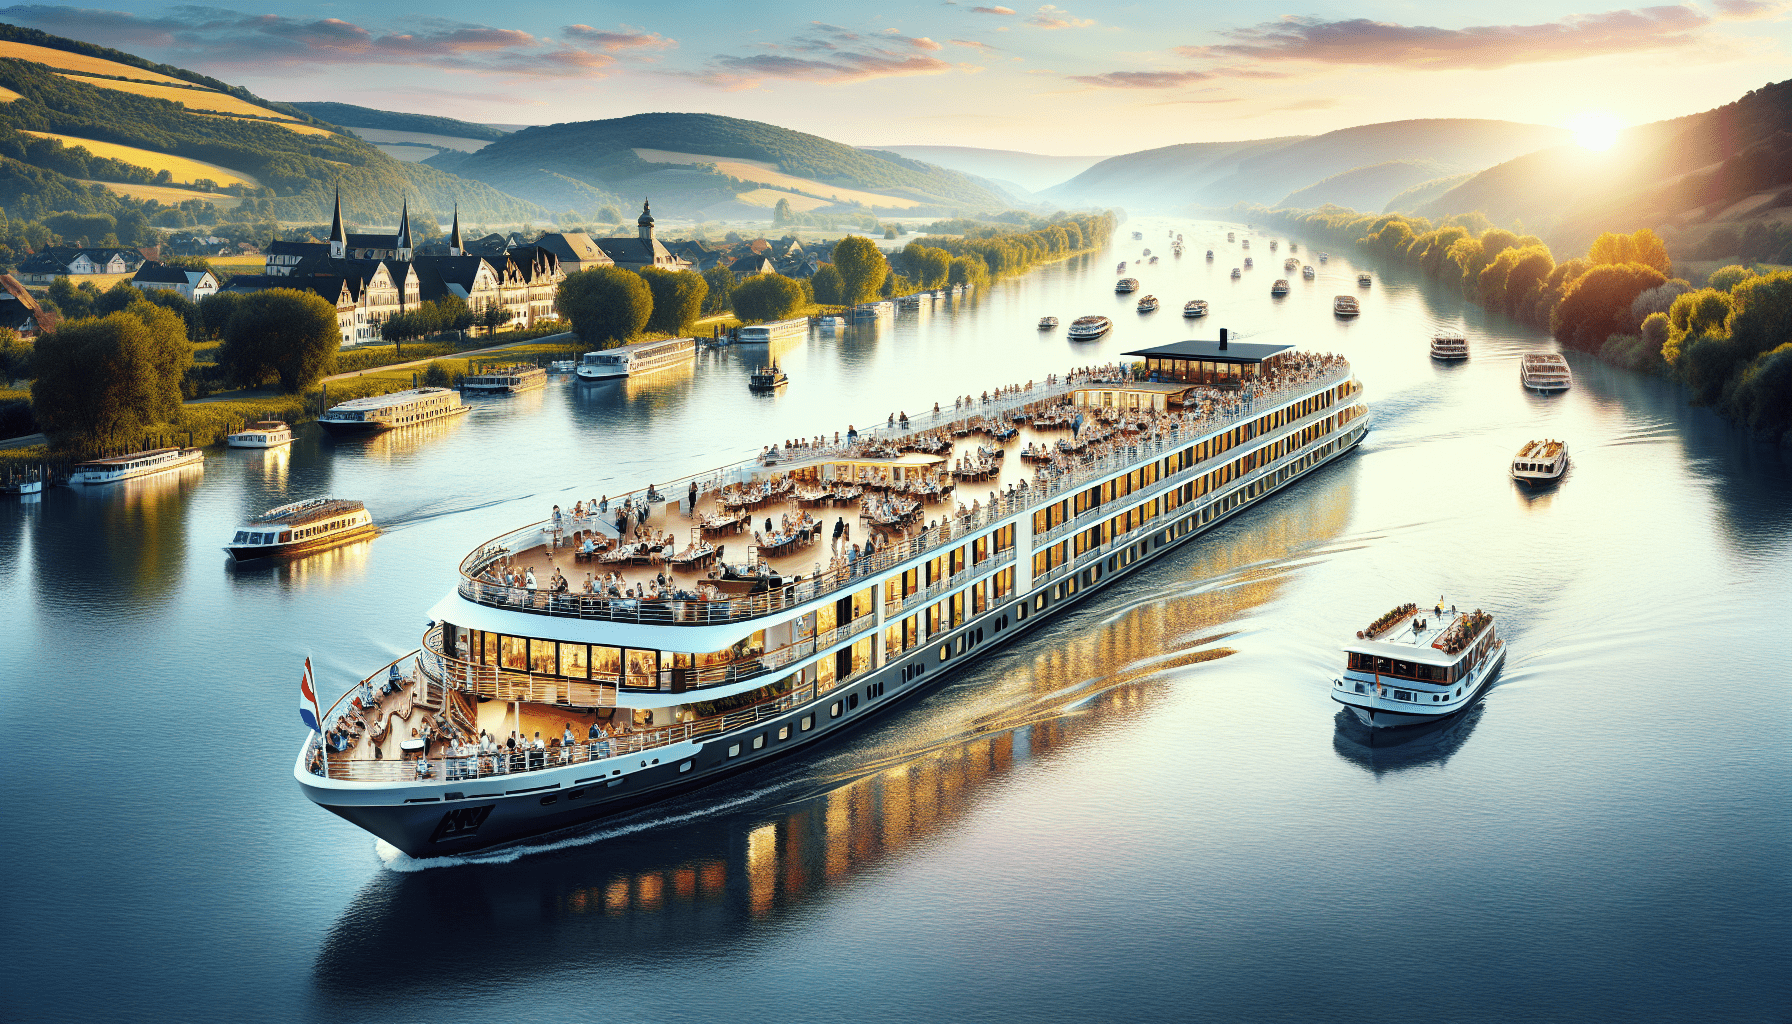 How Many People Are Usually On A River Cruise?